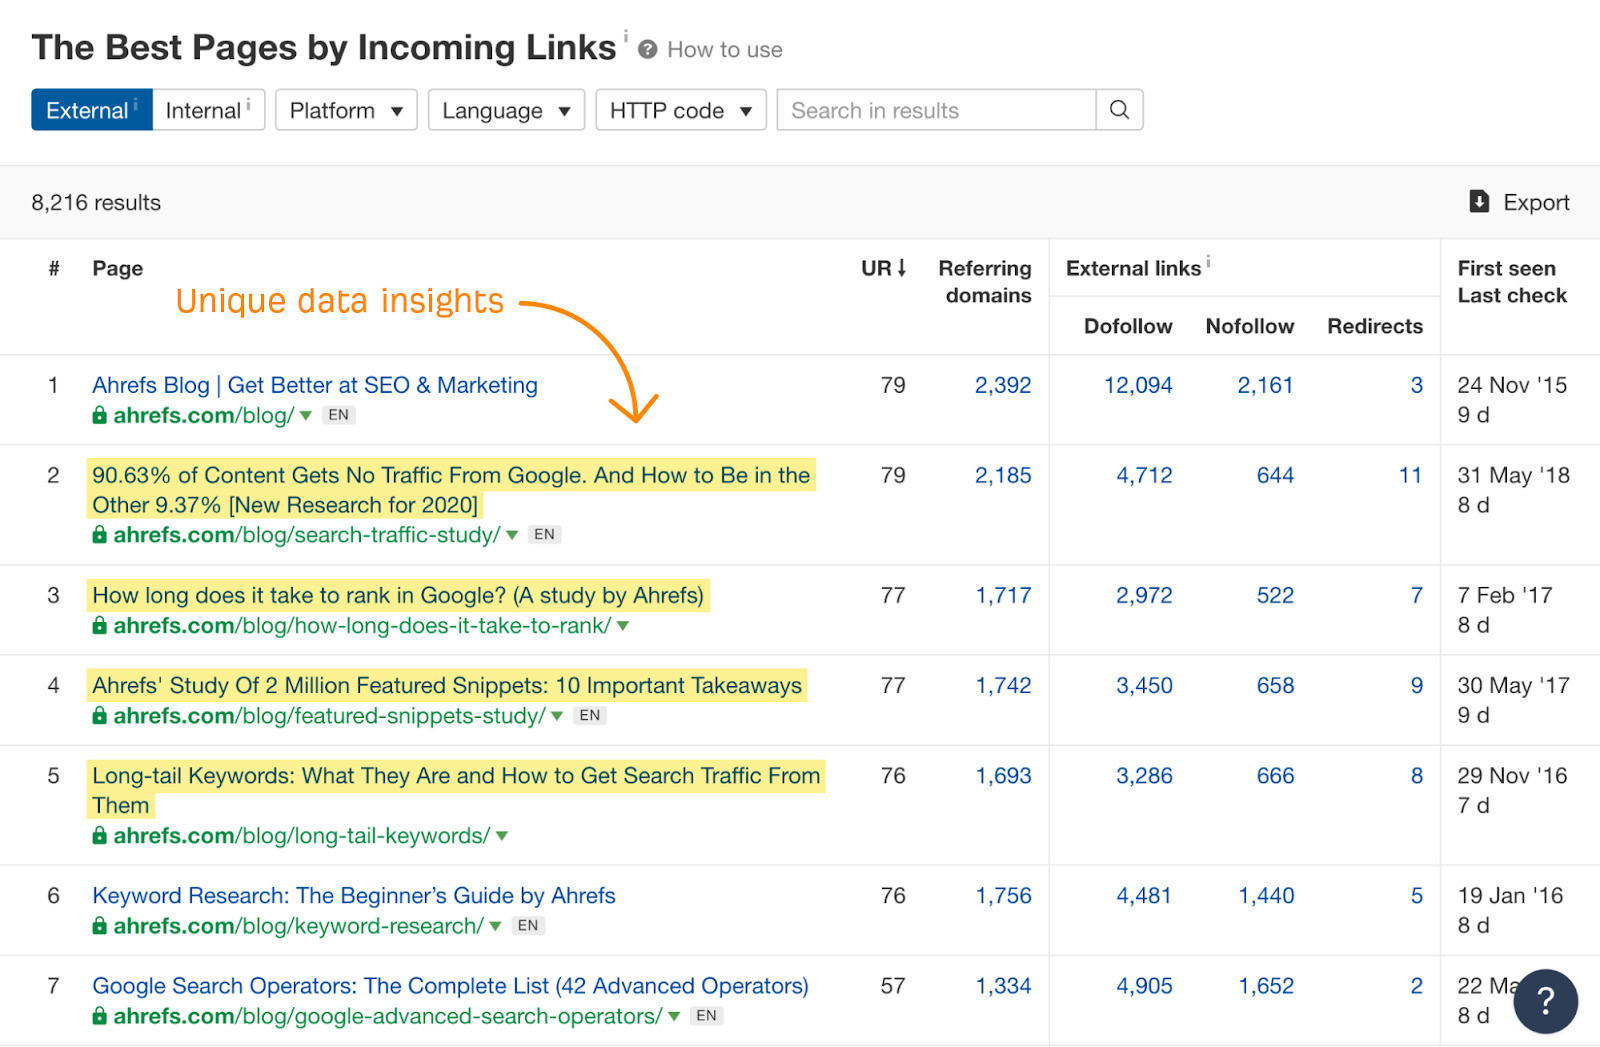 The Best by links report in Ahrefs' Site Explorer